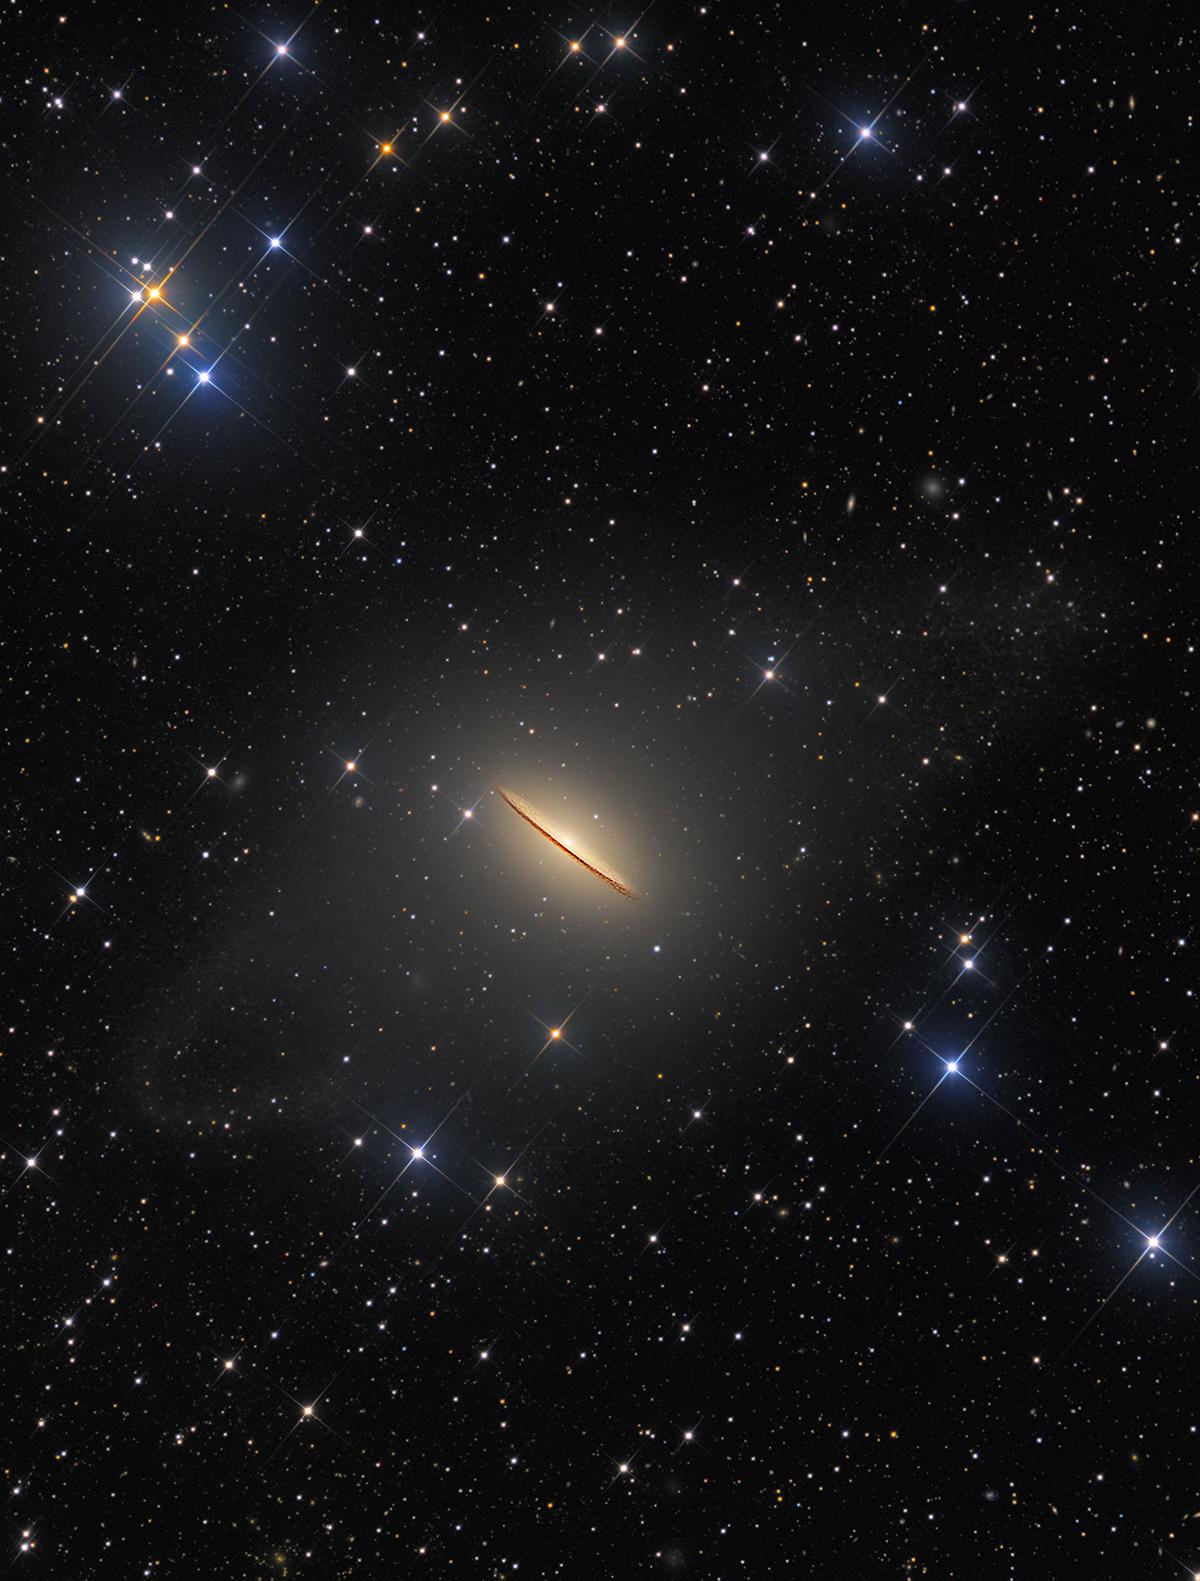 Image of a galaxy side-on, which is golden coloured and resembles a sombrero